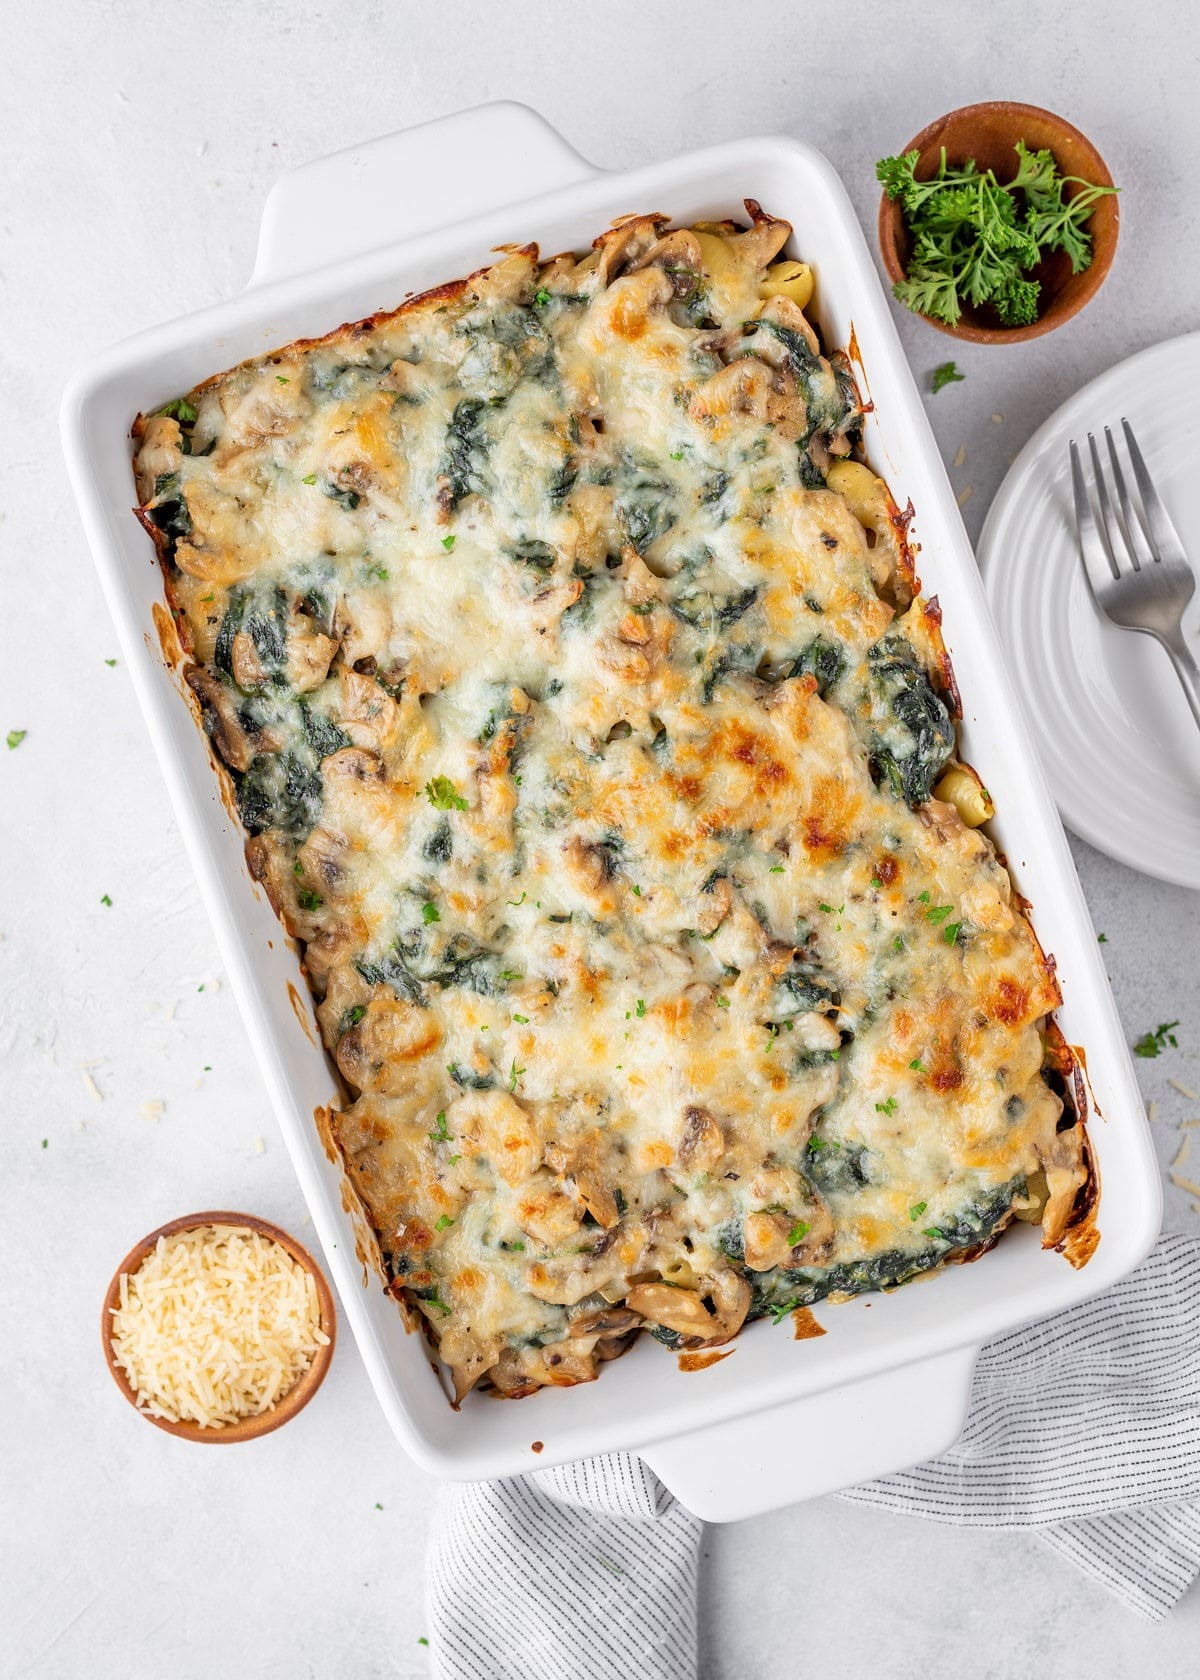 Casserole made with tender pasta, buttered spinach, and mushroom coated in Parmesan cream sauce.